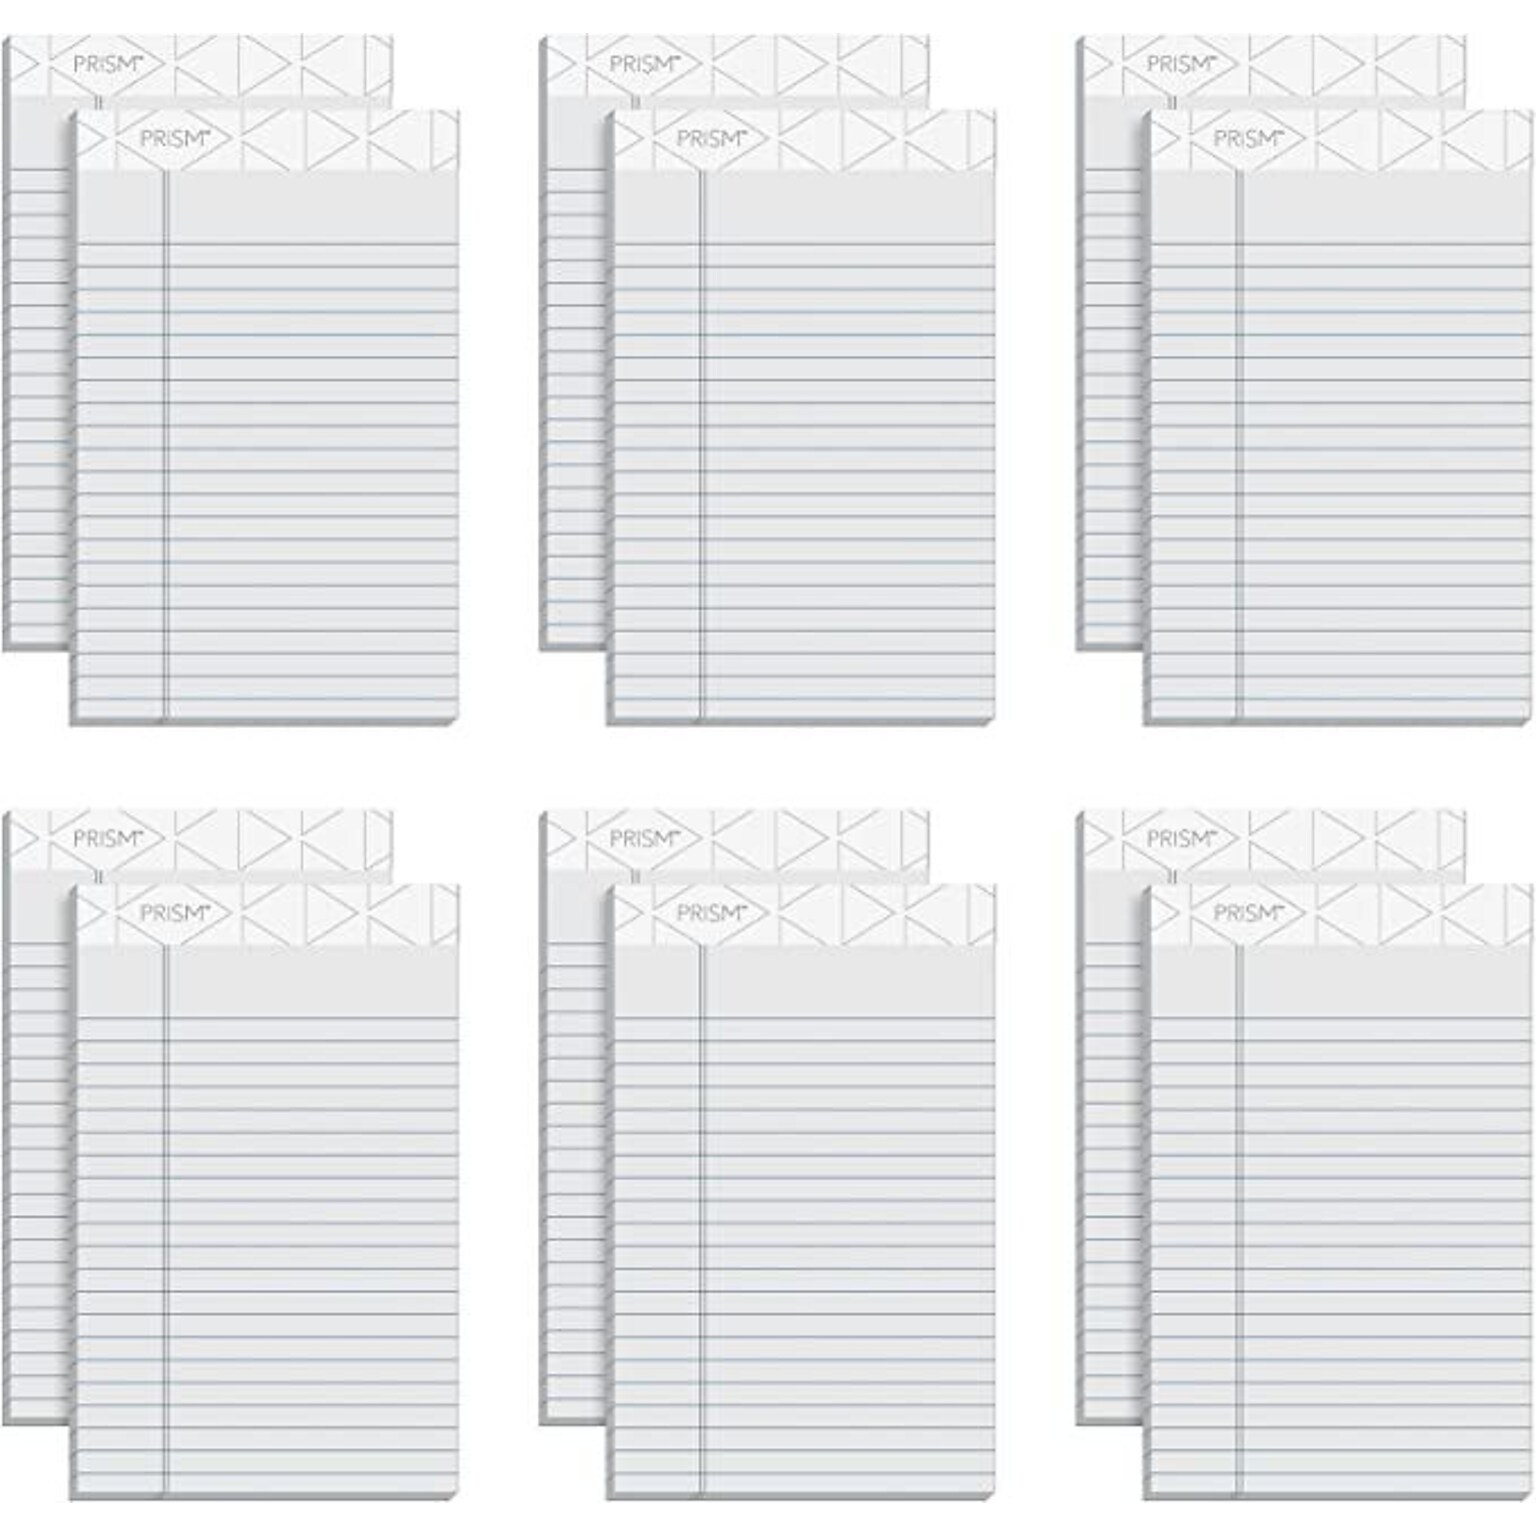 TOPS Prism+ Legal Notepads, 5 x 8, Narrow Ruled, Gray, 50 Sheets/Pad, 12 Pads/Pack (63060)